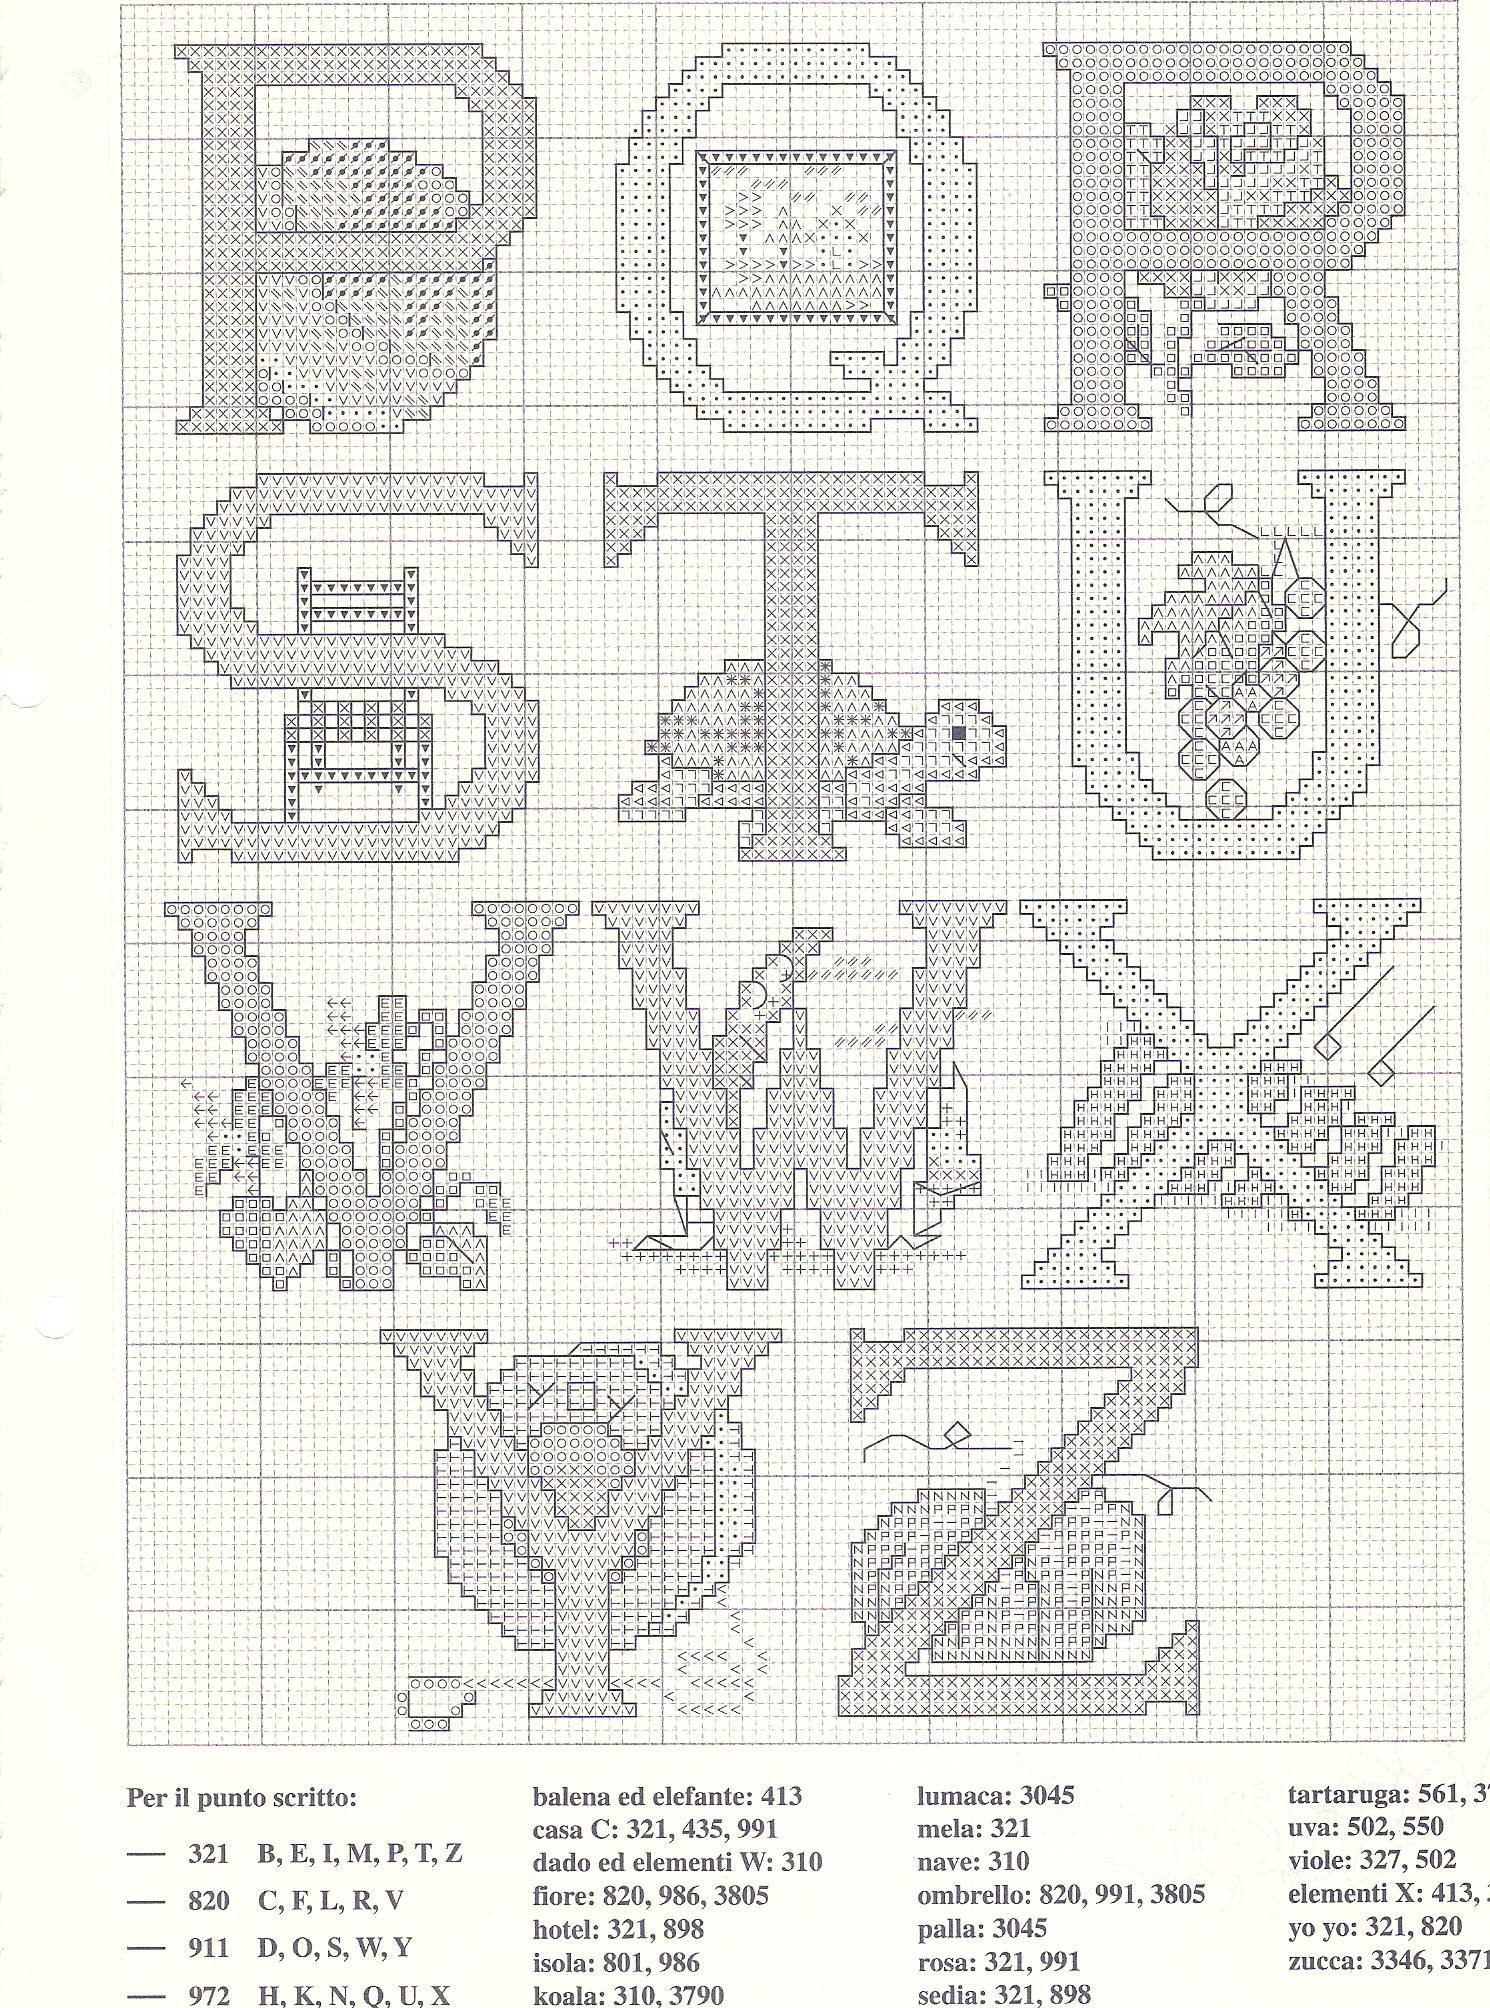 Cross stitch alphabet with various objects (3)